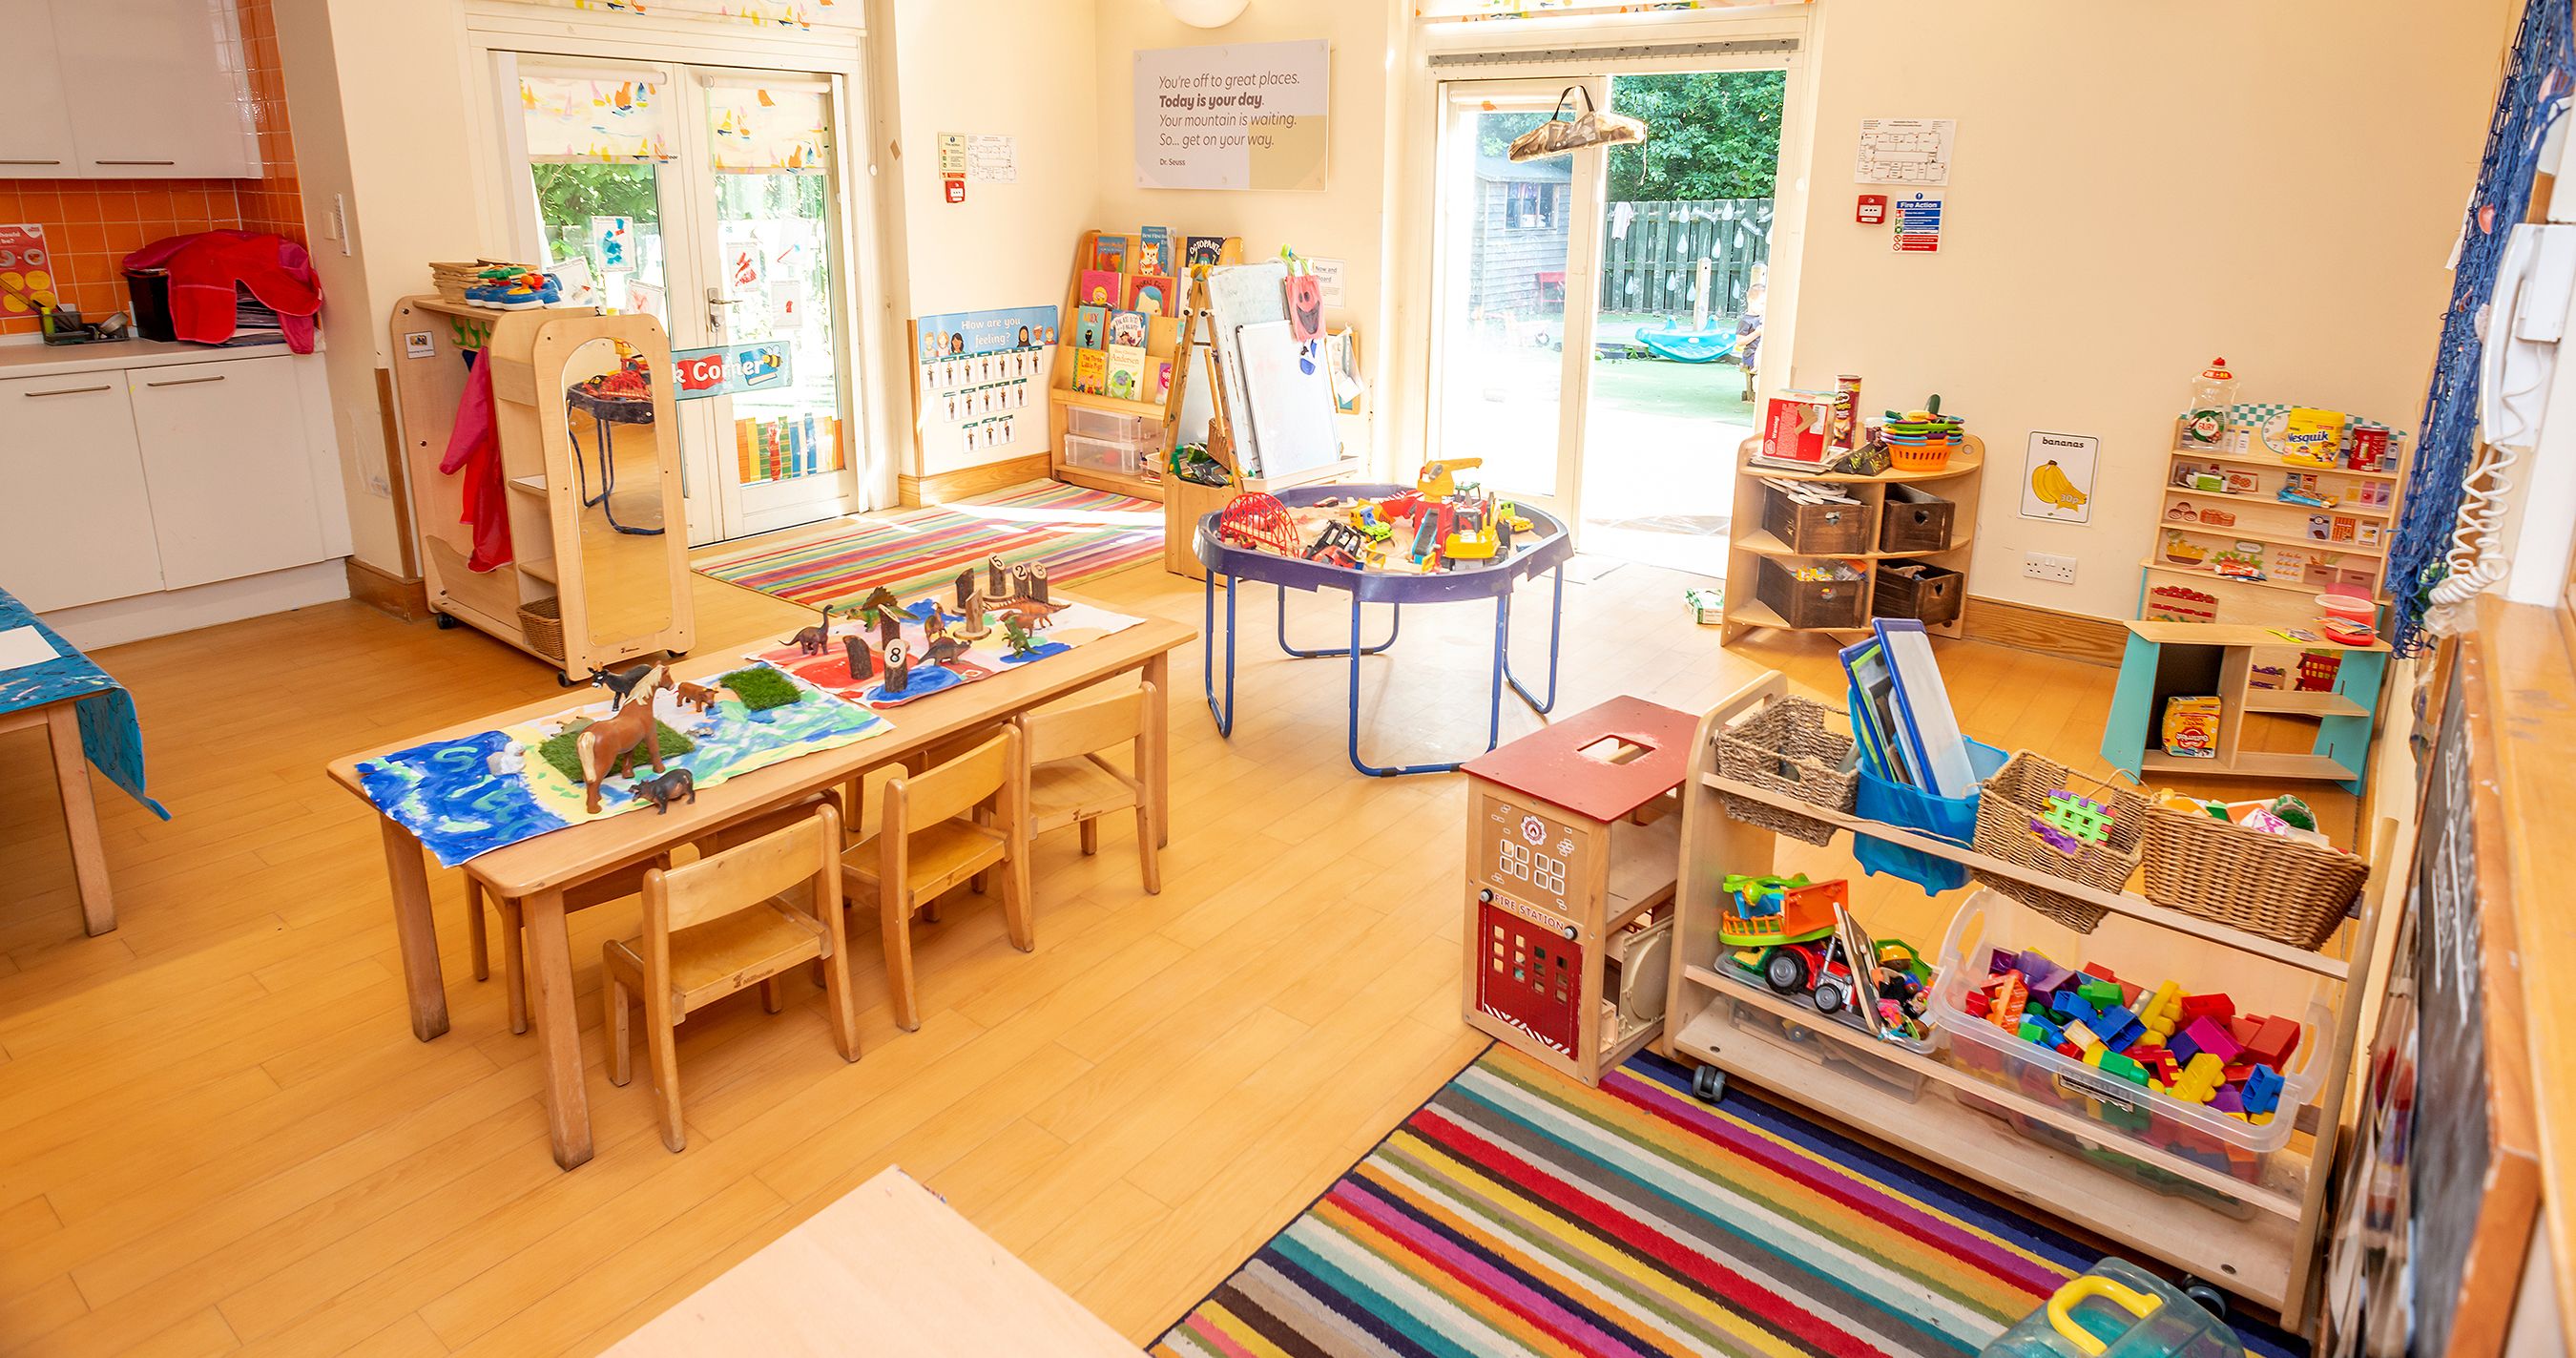 Busy Bees at Horsham - The best start in life Busy Bees at Horsham Horsham 01403 754610